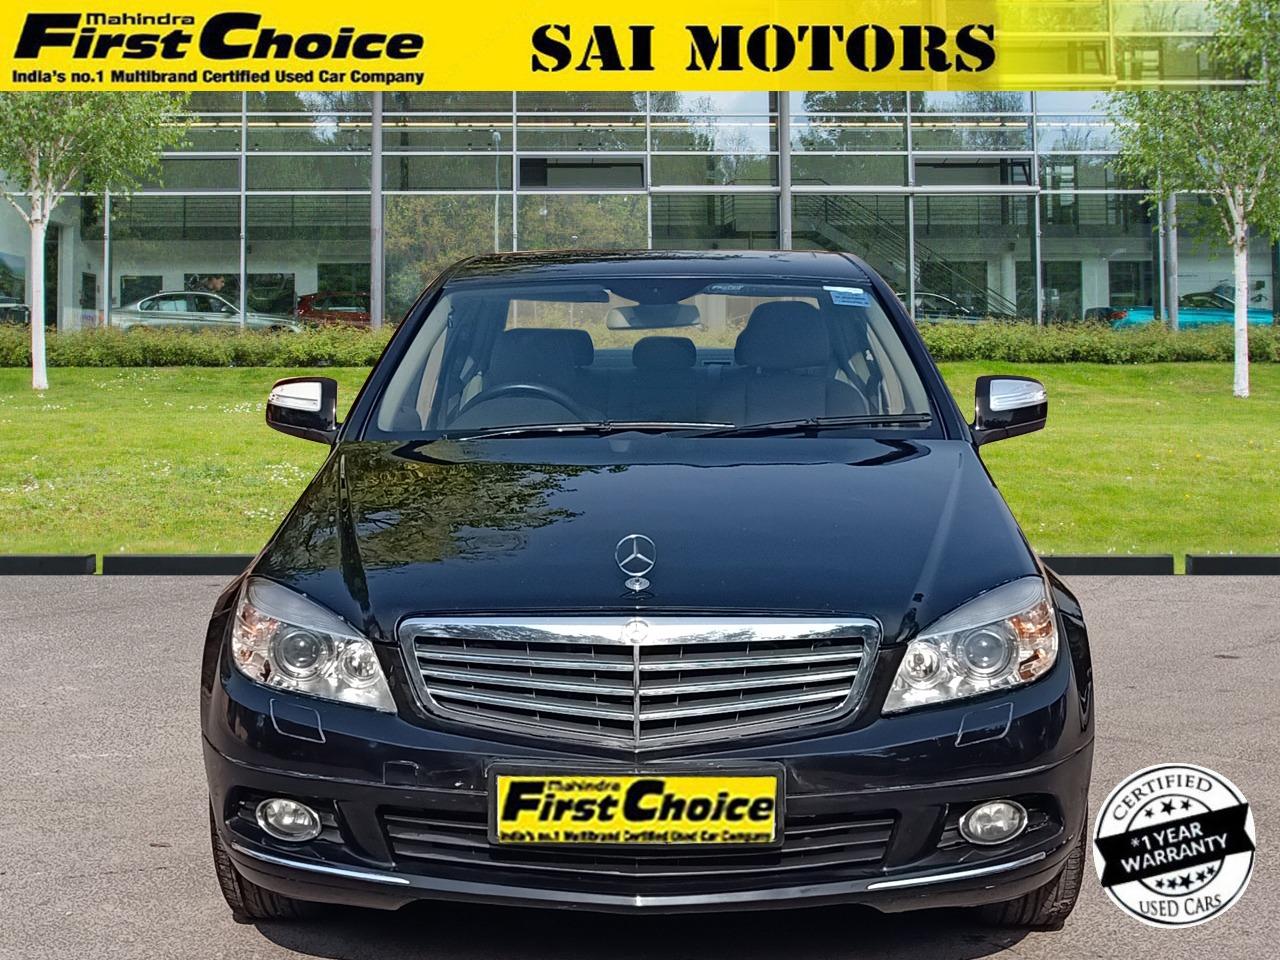 Used 2009 Mercedes-Benz C-Class